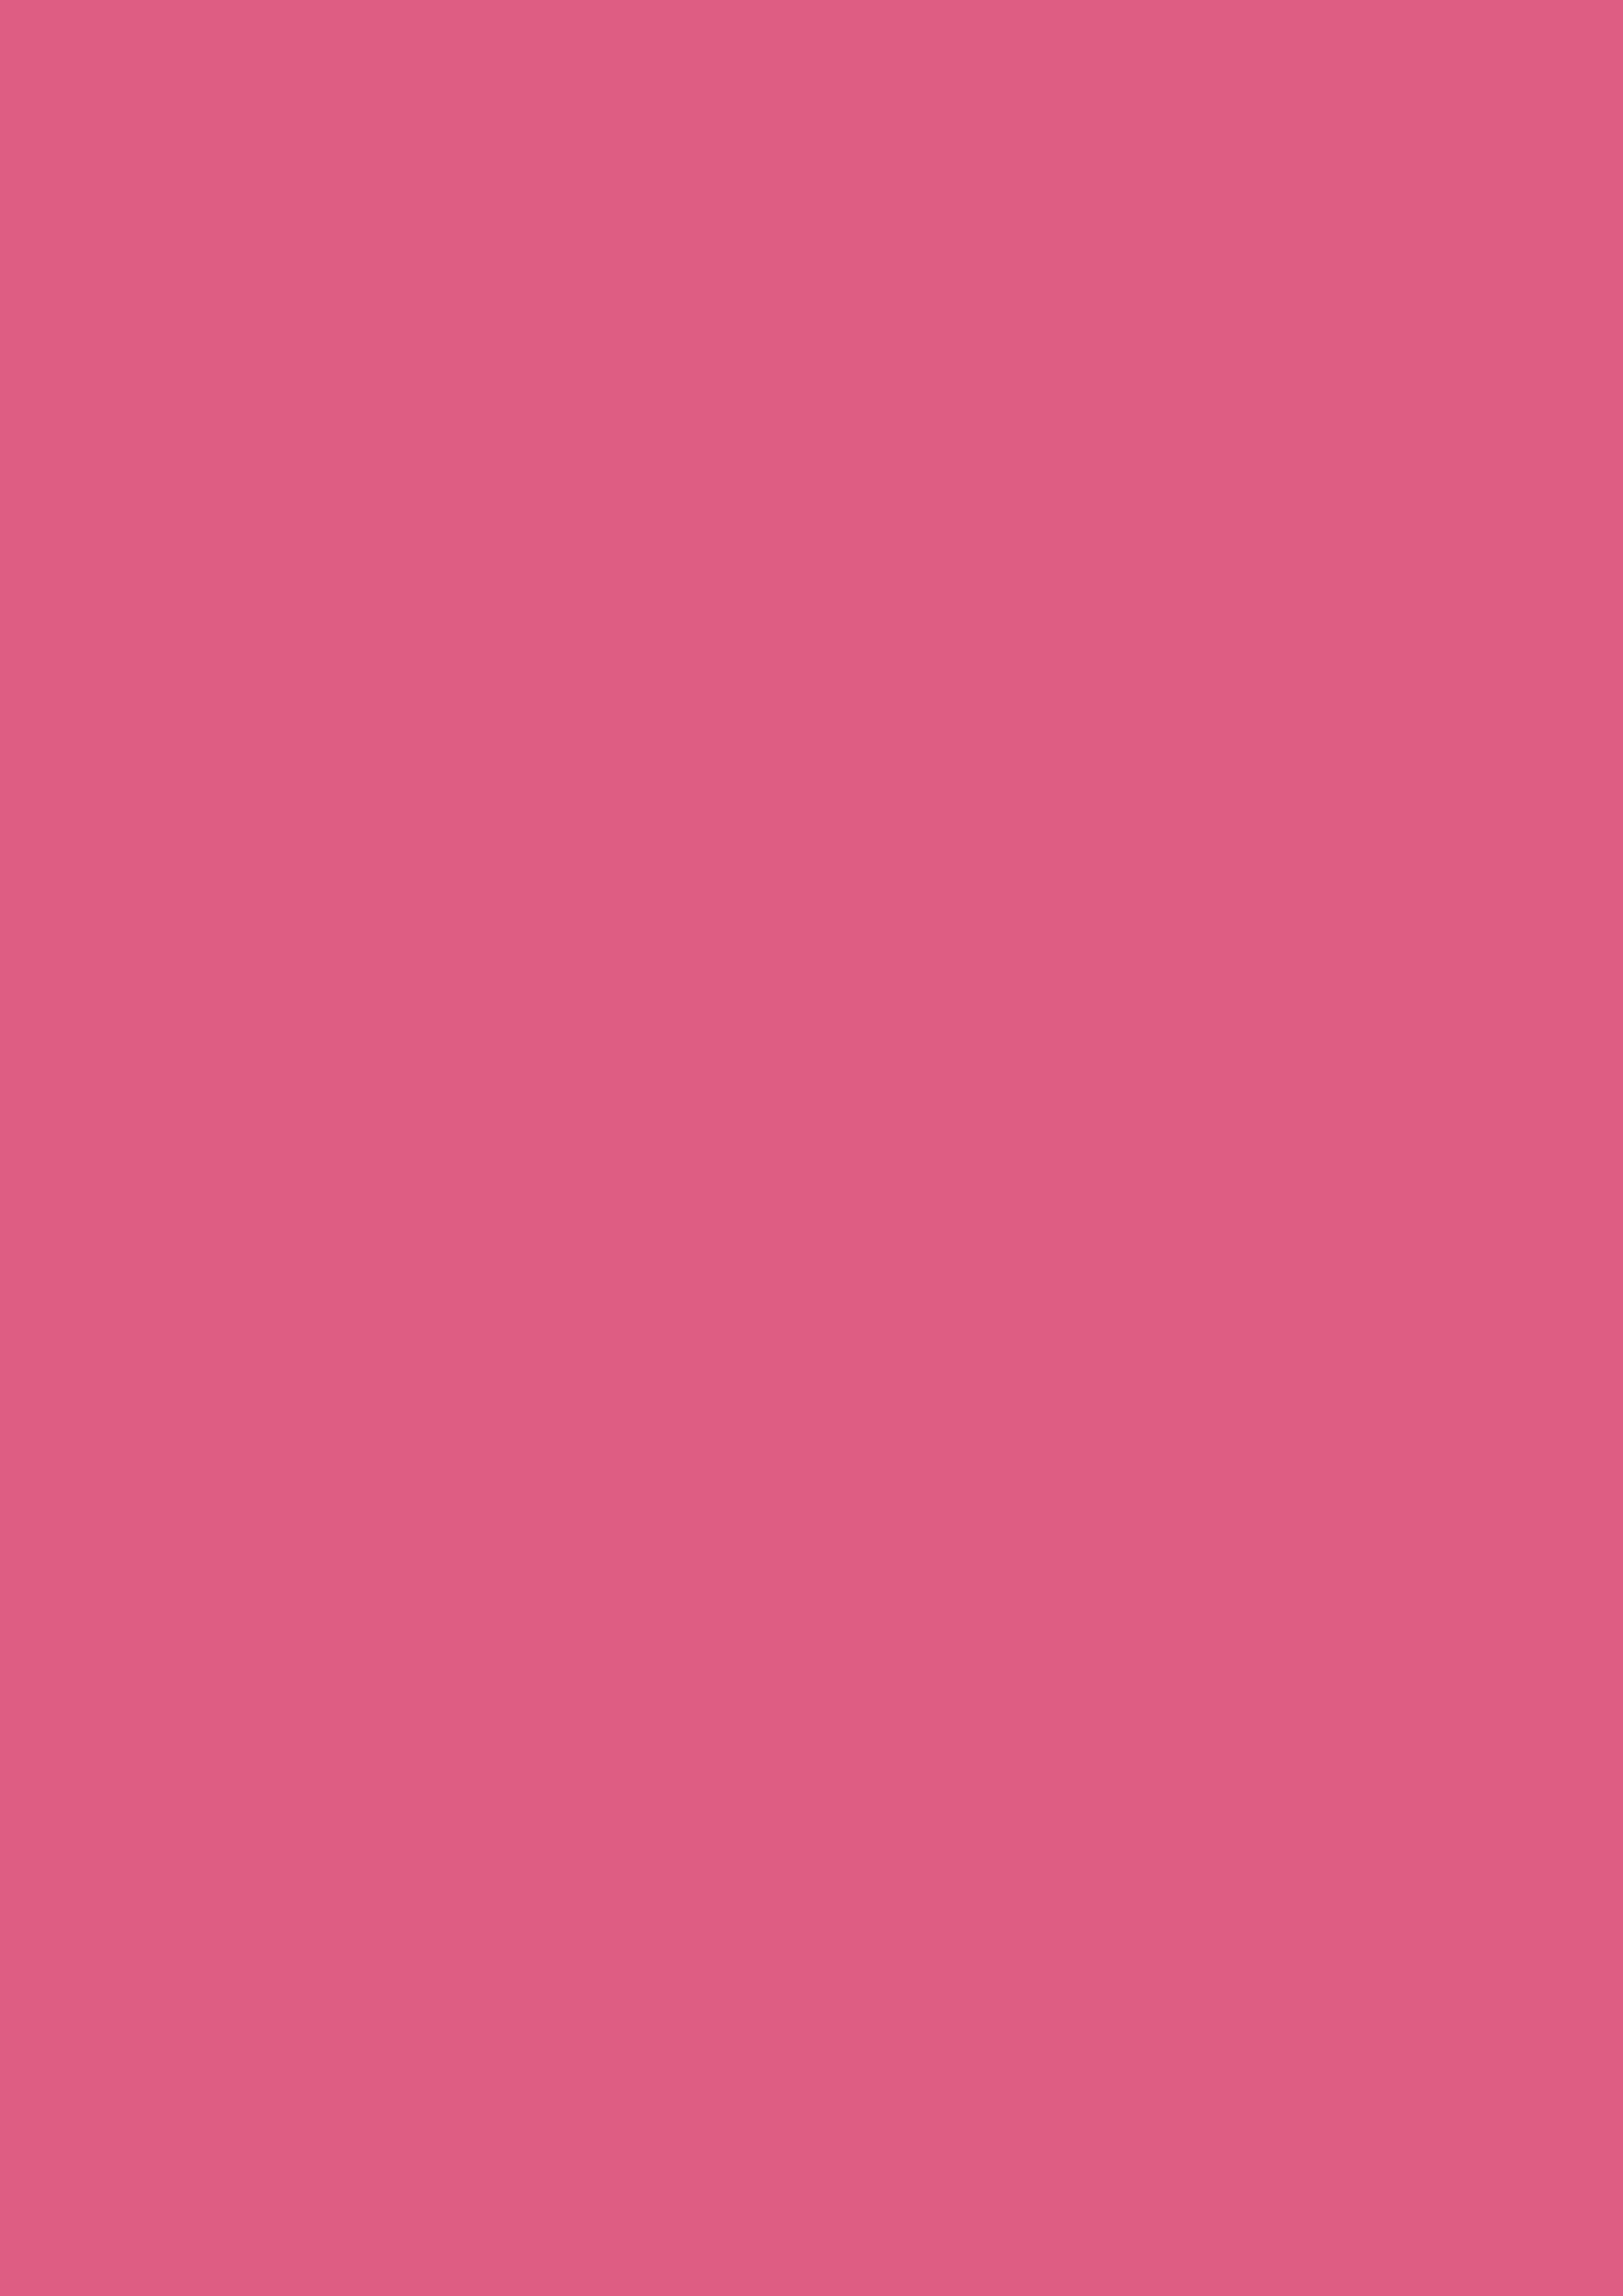 2480x3508 Blush Solid Color Background